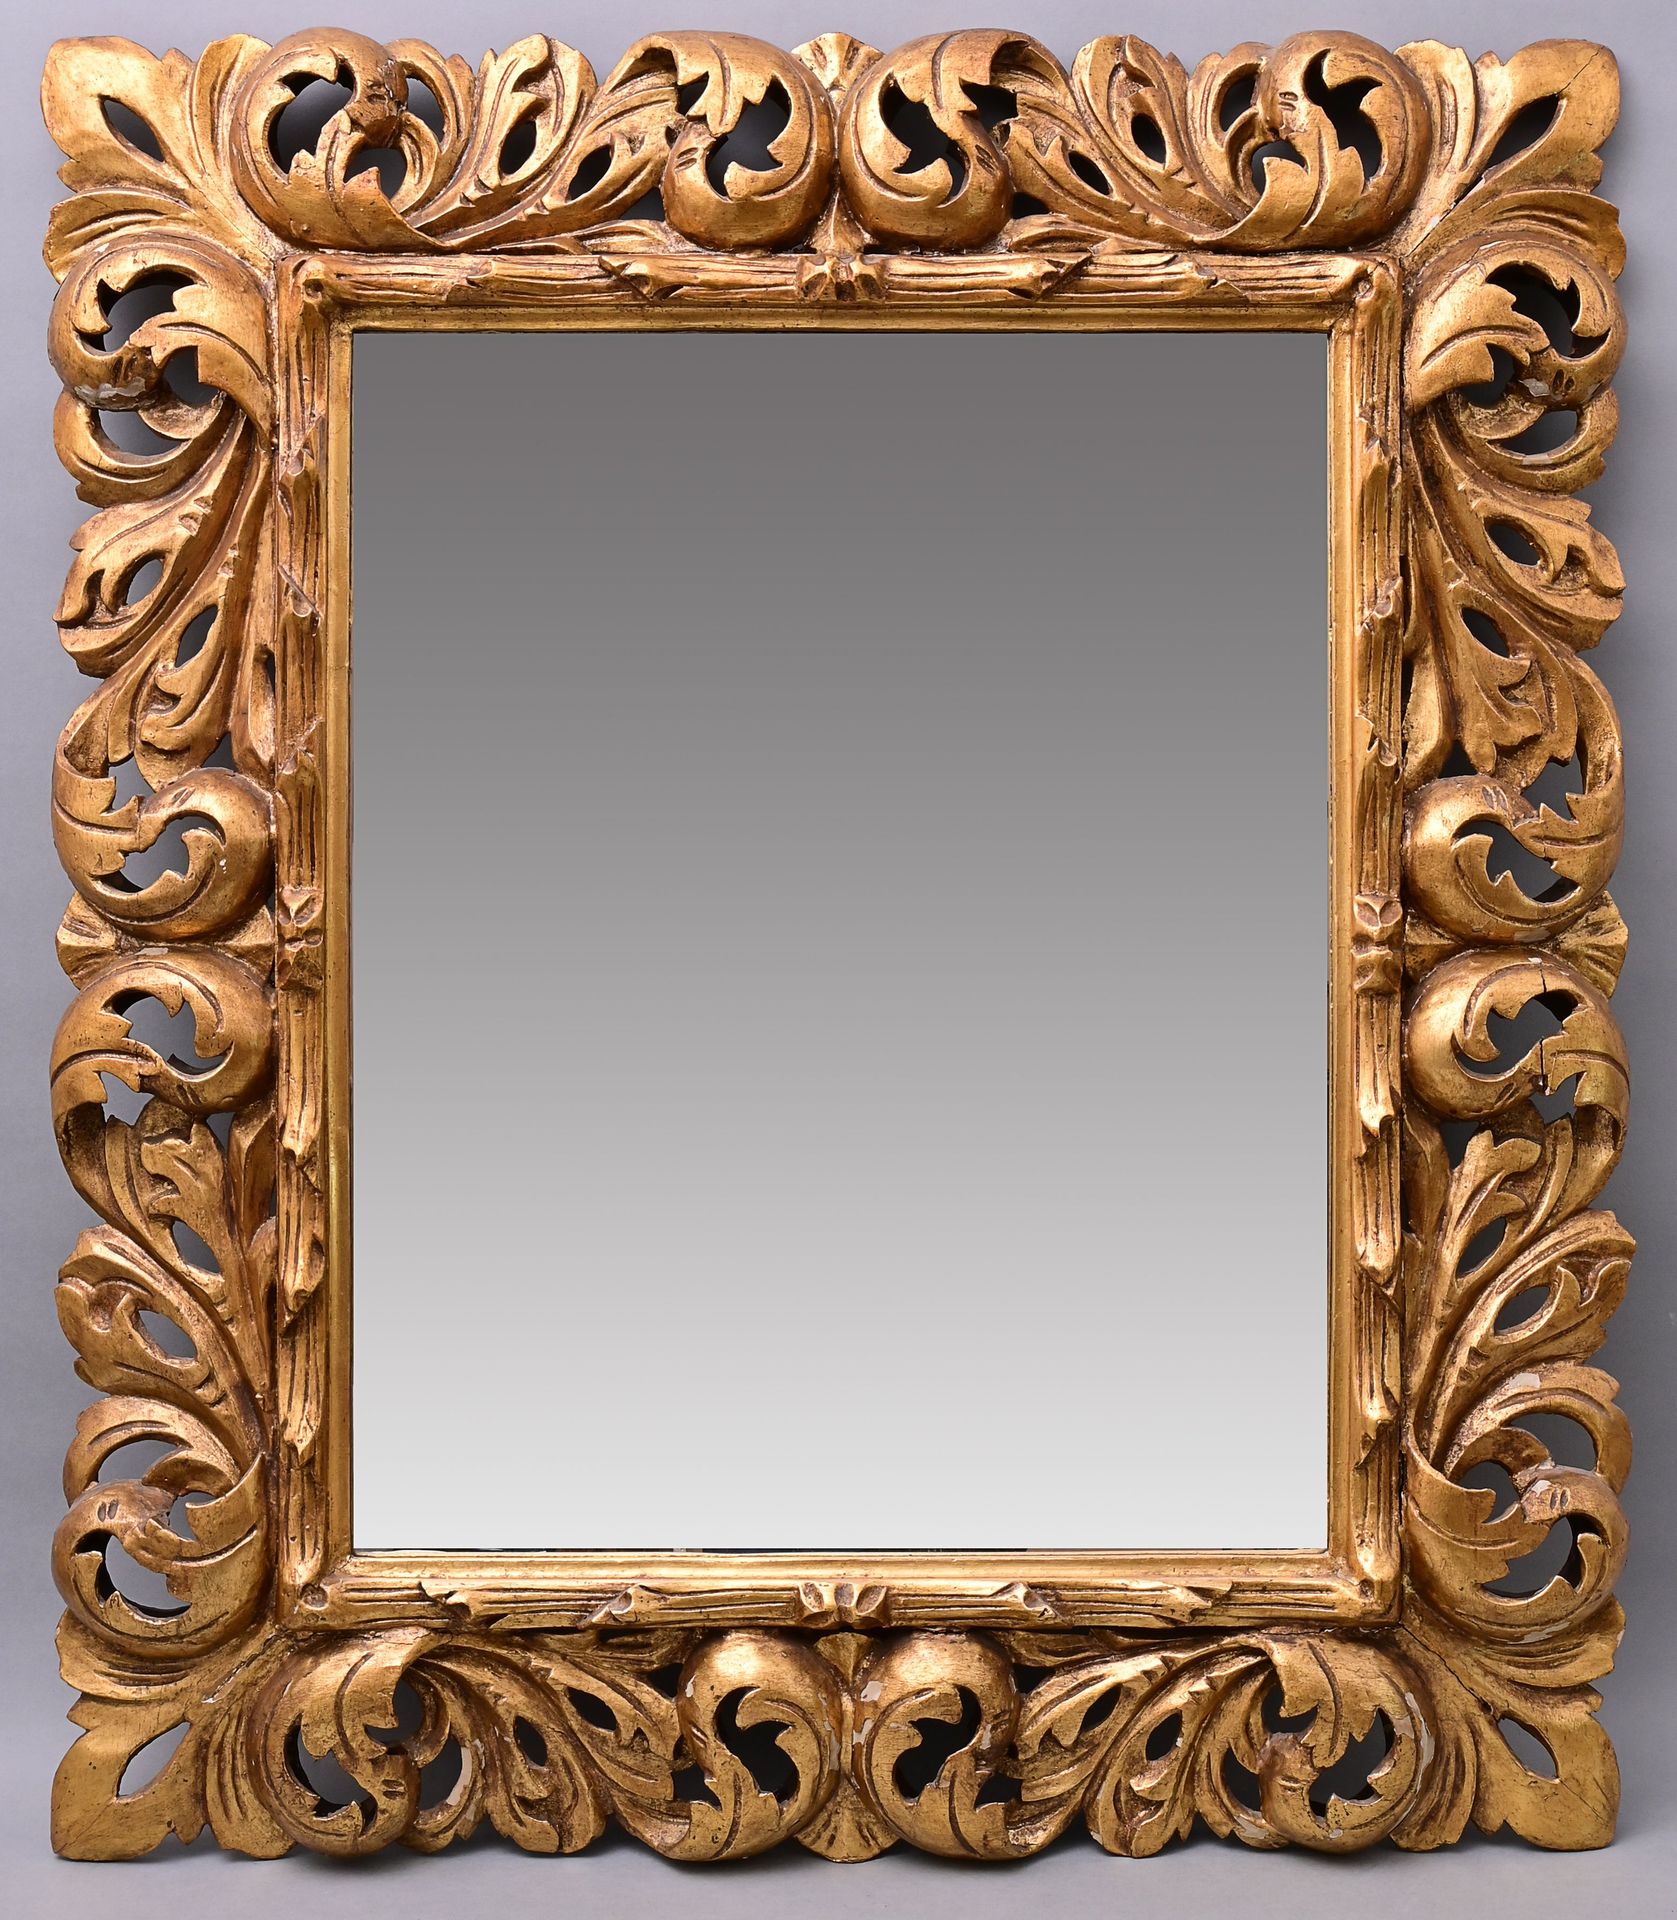 Null Large Florentine frame, 19th c. Wood, carved, gilded. Mirror glass added. F&hellip;